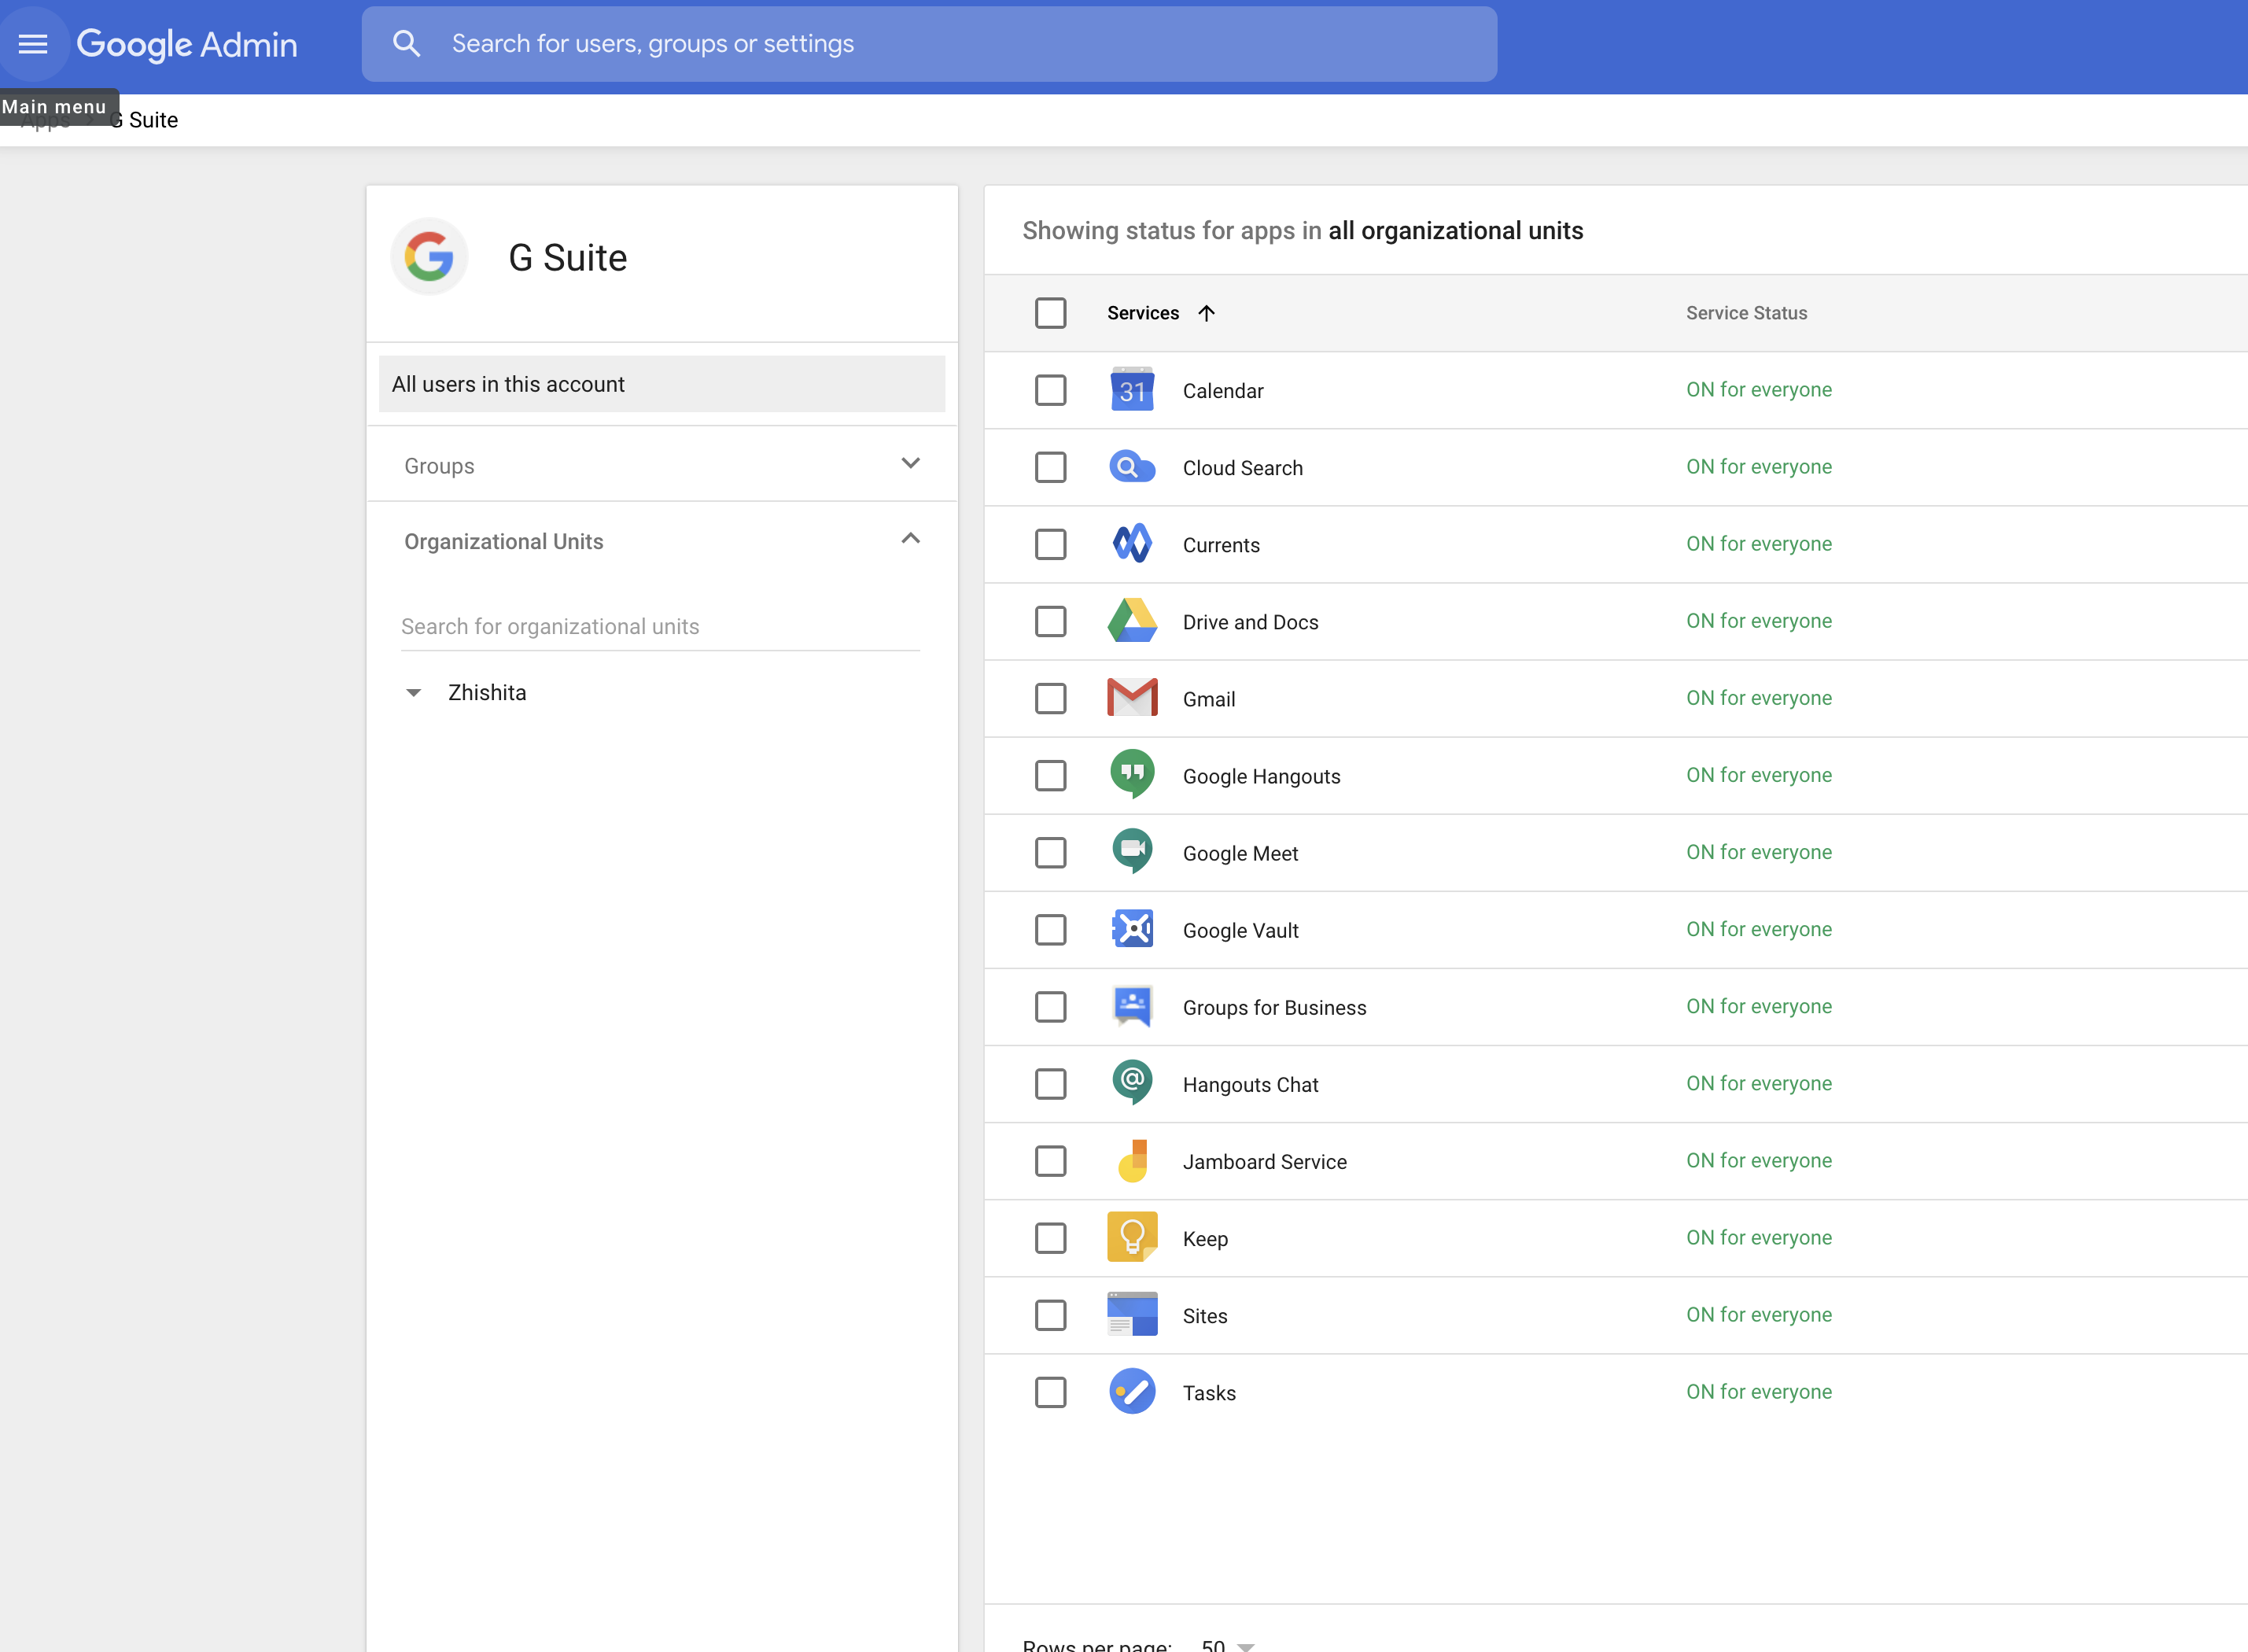 GSuite apps are on